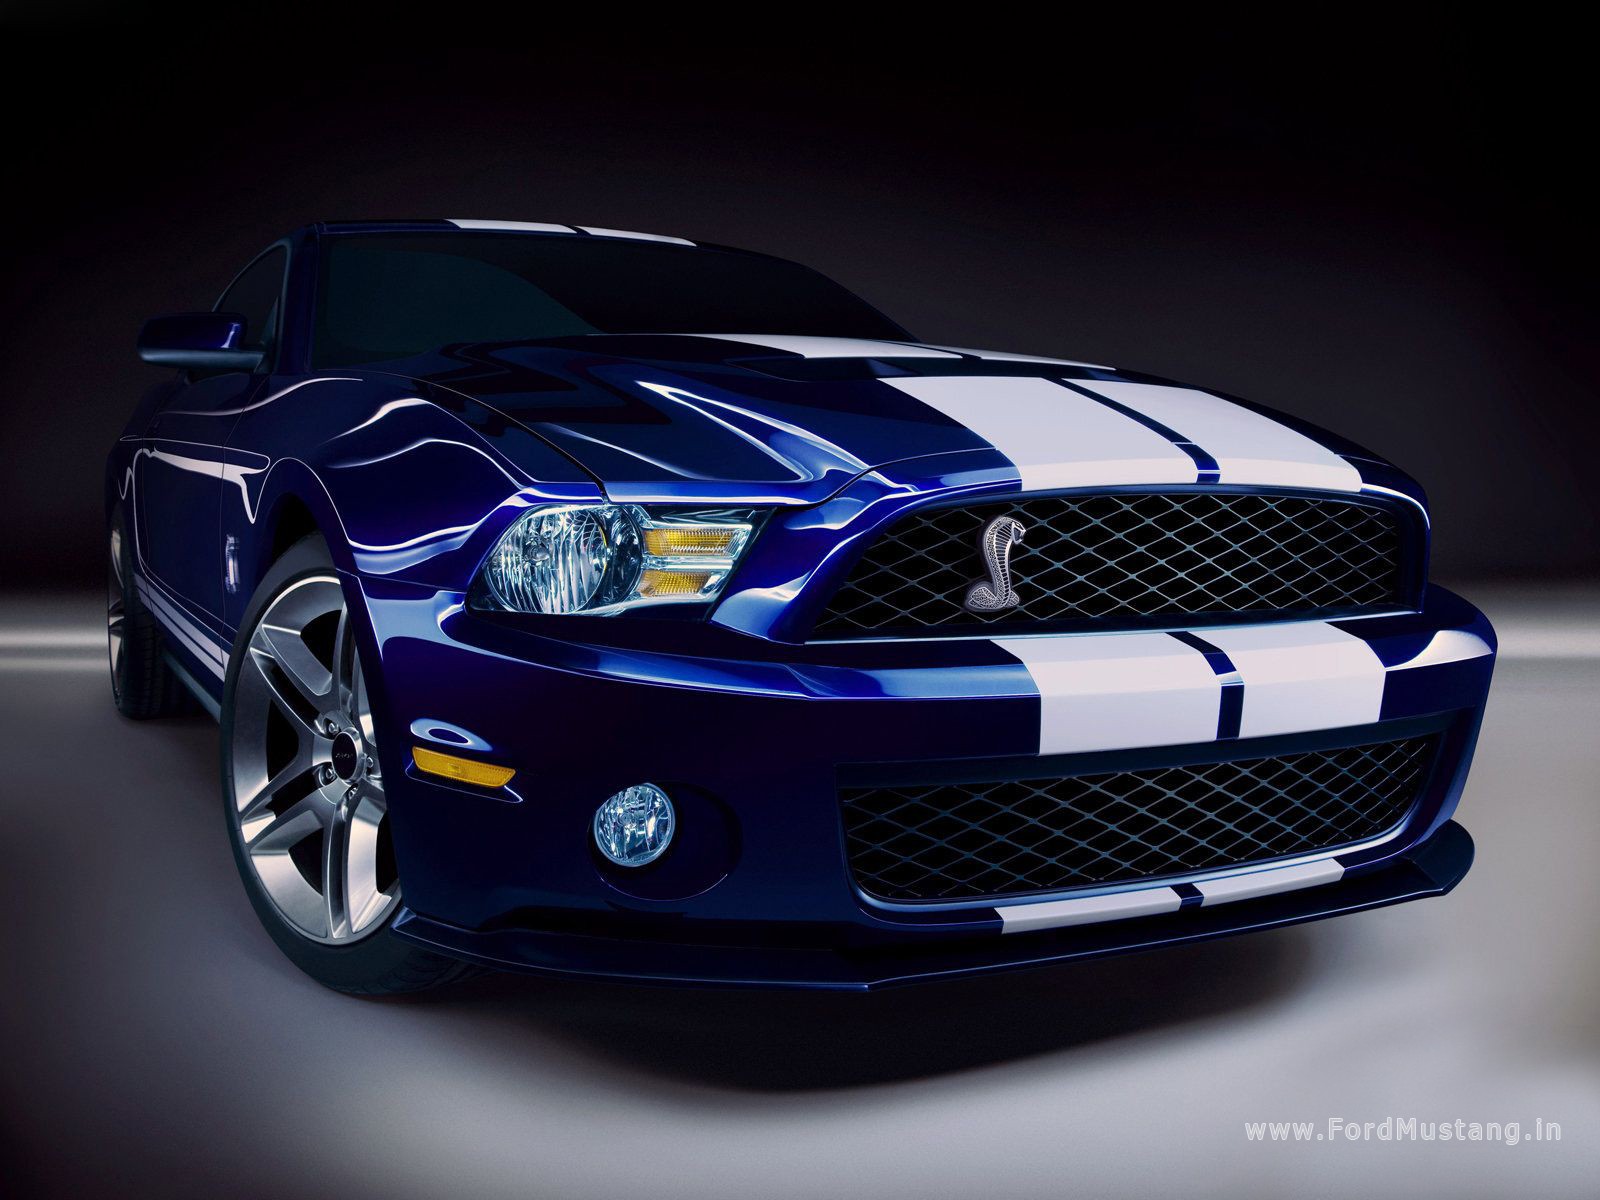 Ford Mustang Shelby gt500 Wallpapers   Best Wall Papers With